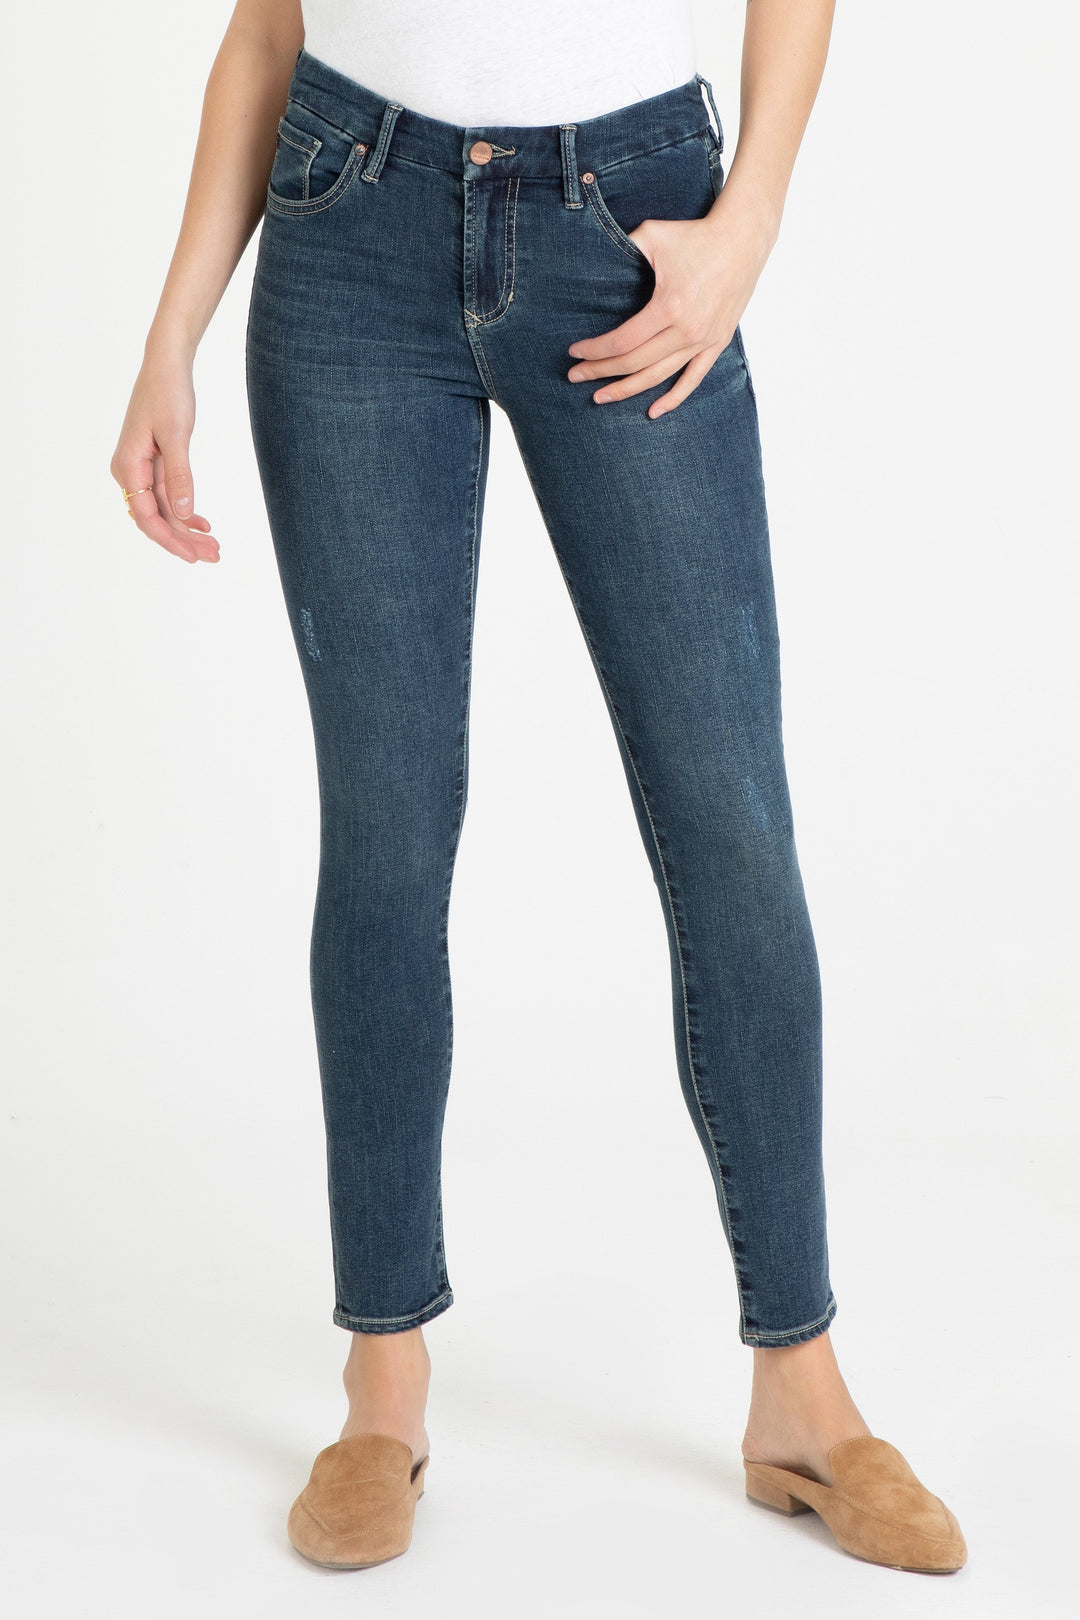 image of a female model wearing a GISELE HIGH RISE ANKLE SKINNY JEANS BROOKLYN JEANS